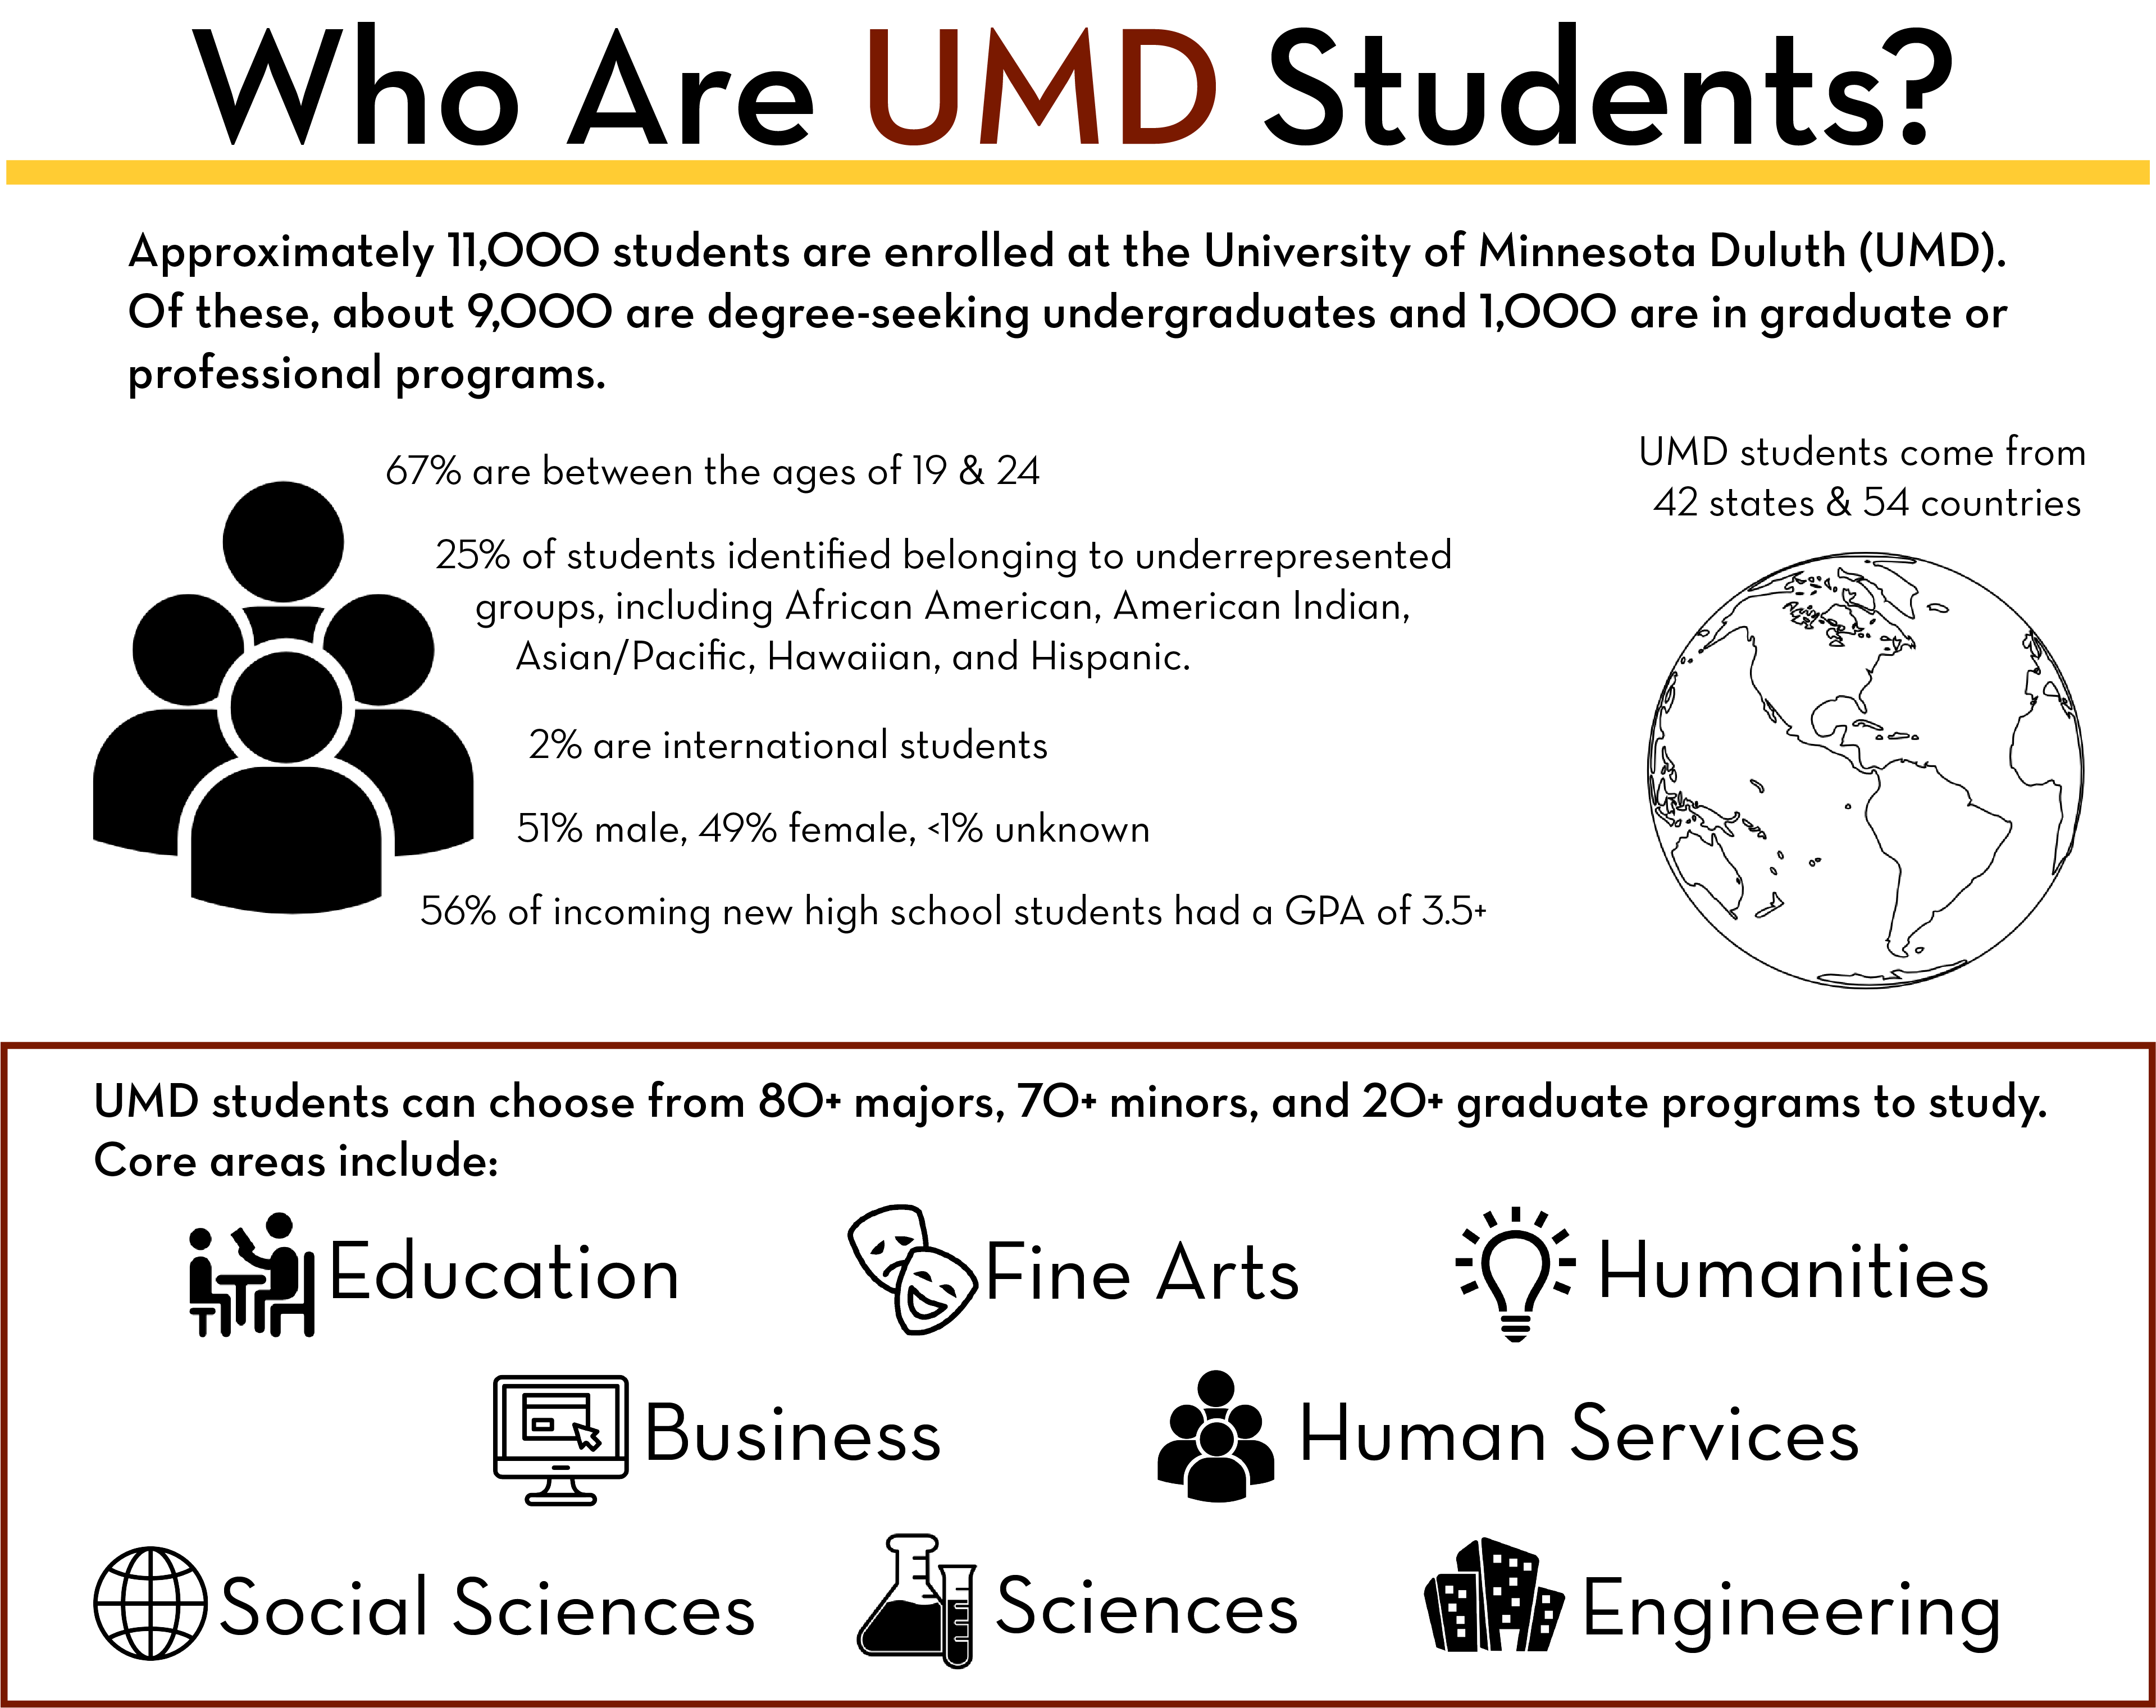 UMD student demographic information and core industries for UMD